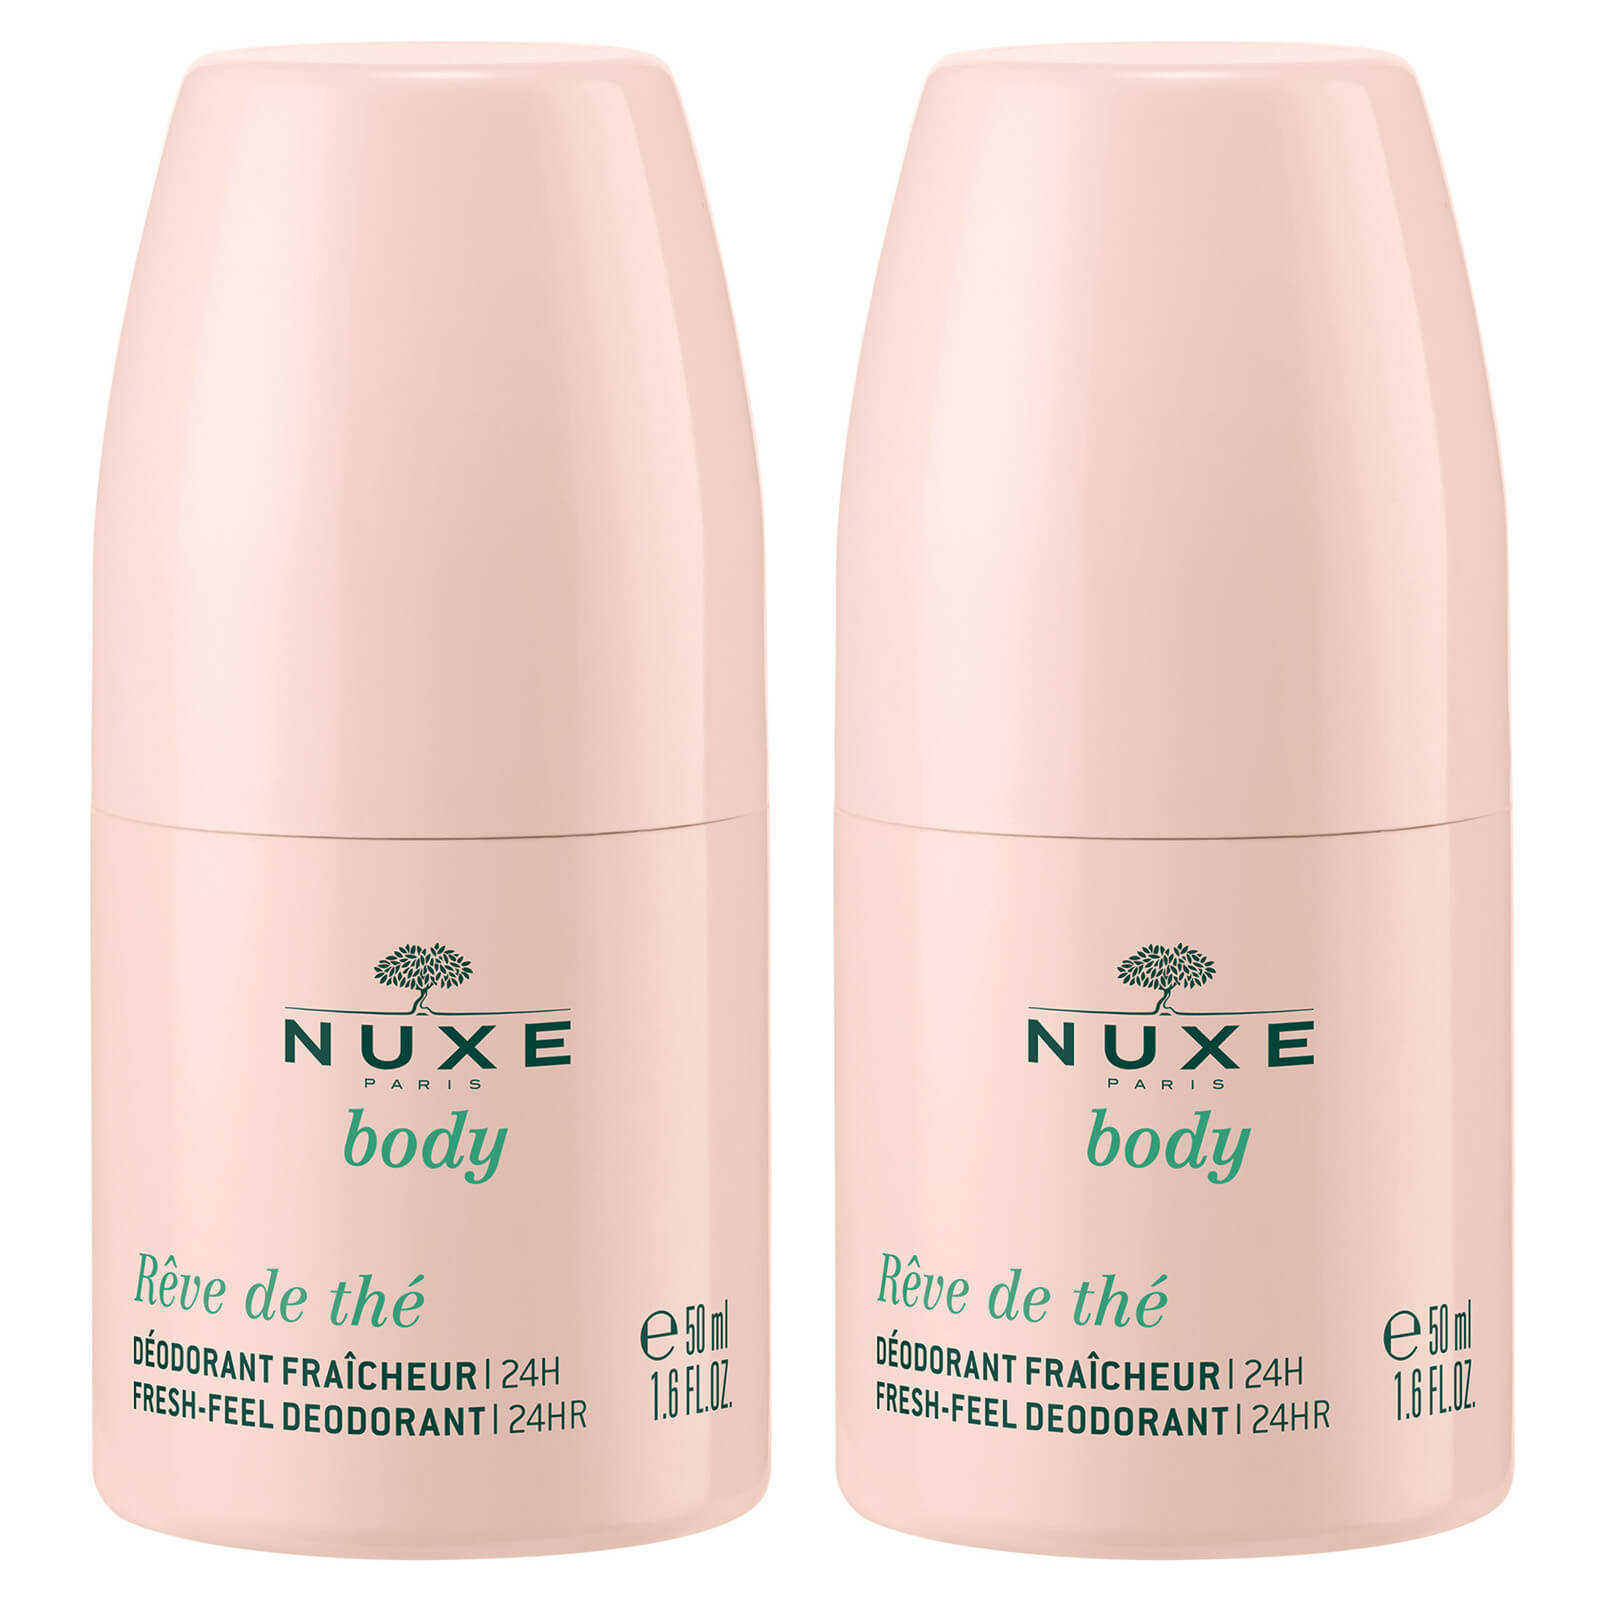 Nuxe 24hr Freshness Deodorant Duo